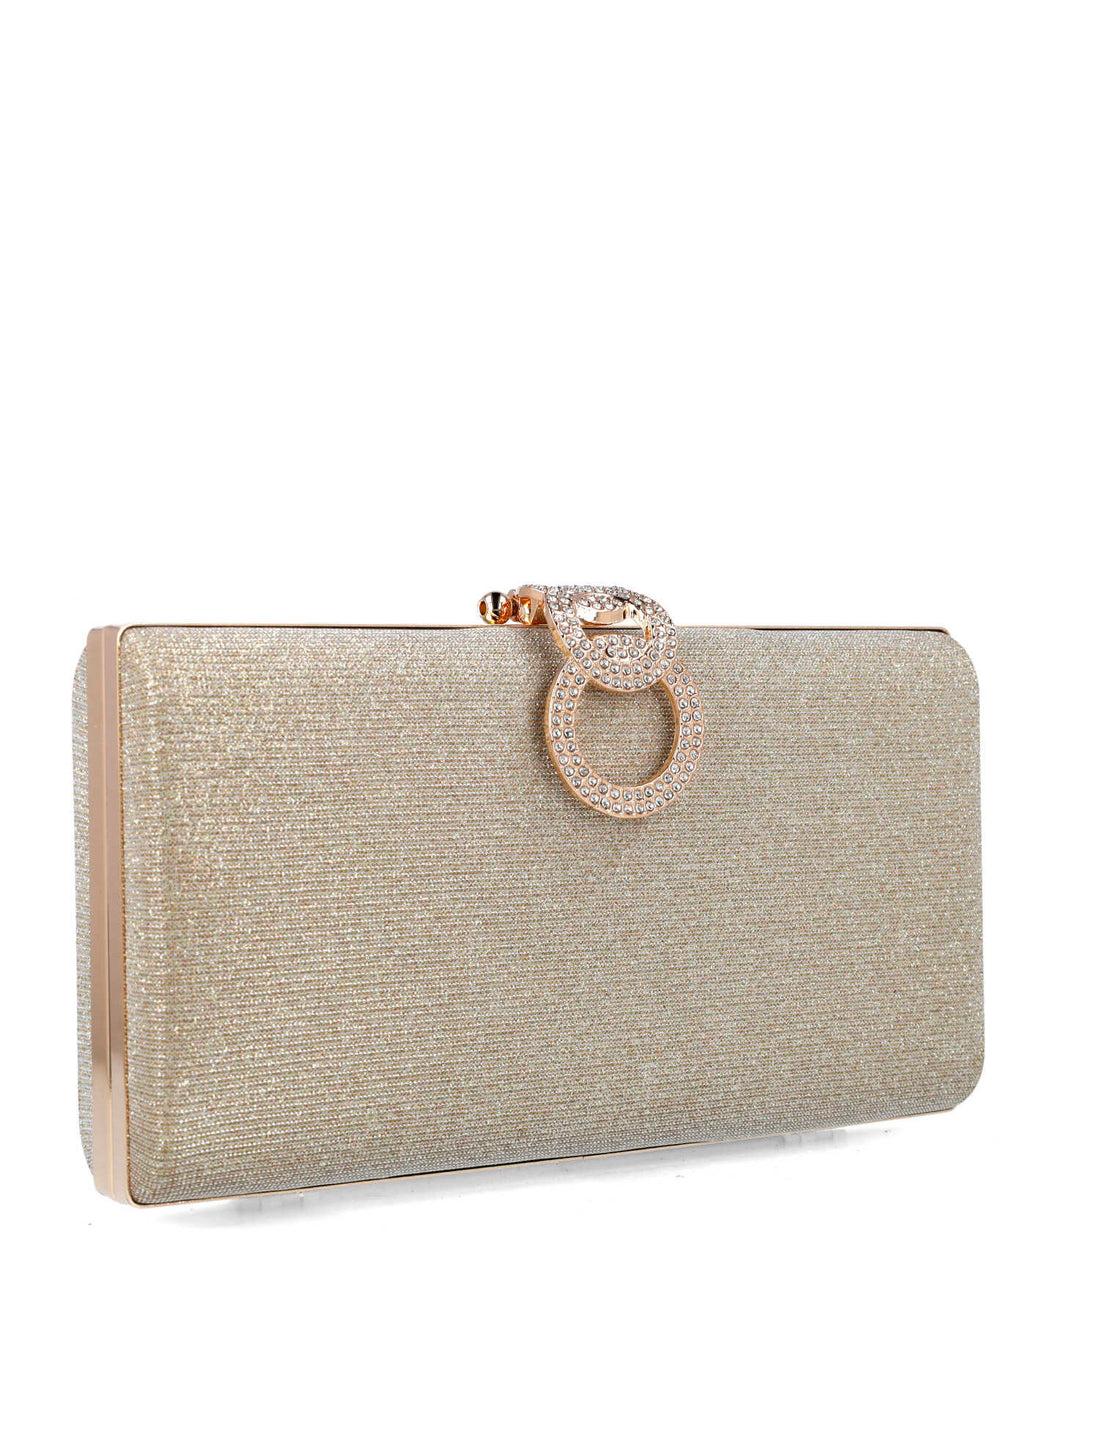 Shimmery Clutch With Embellished Hardware_85479_00_02